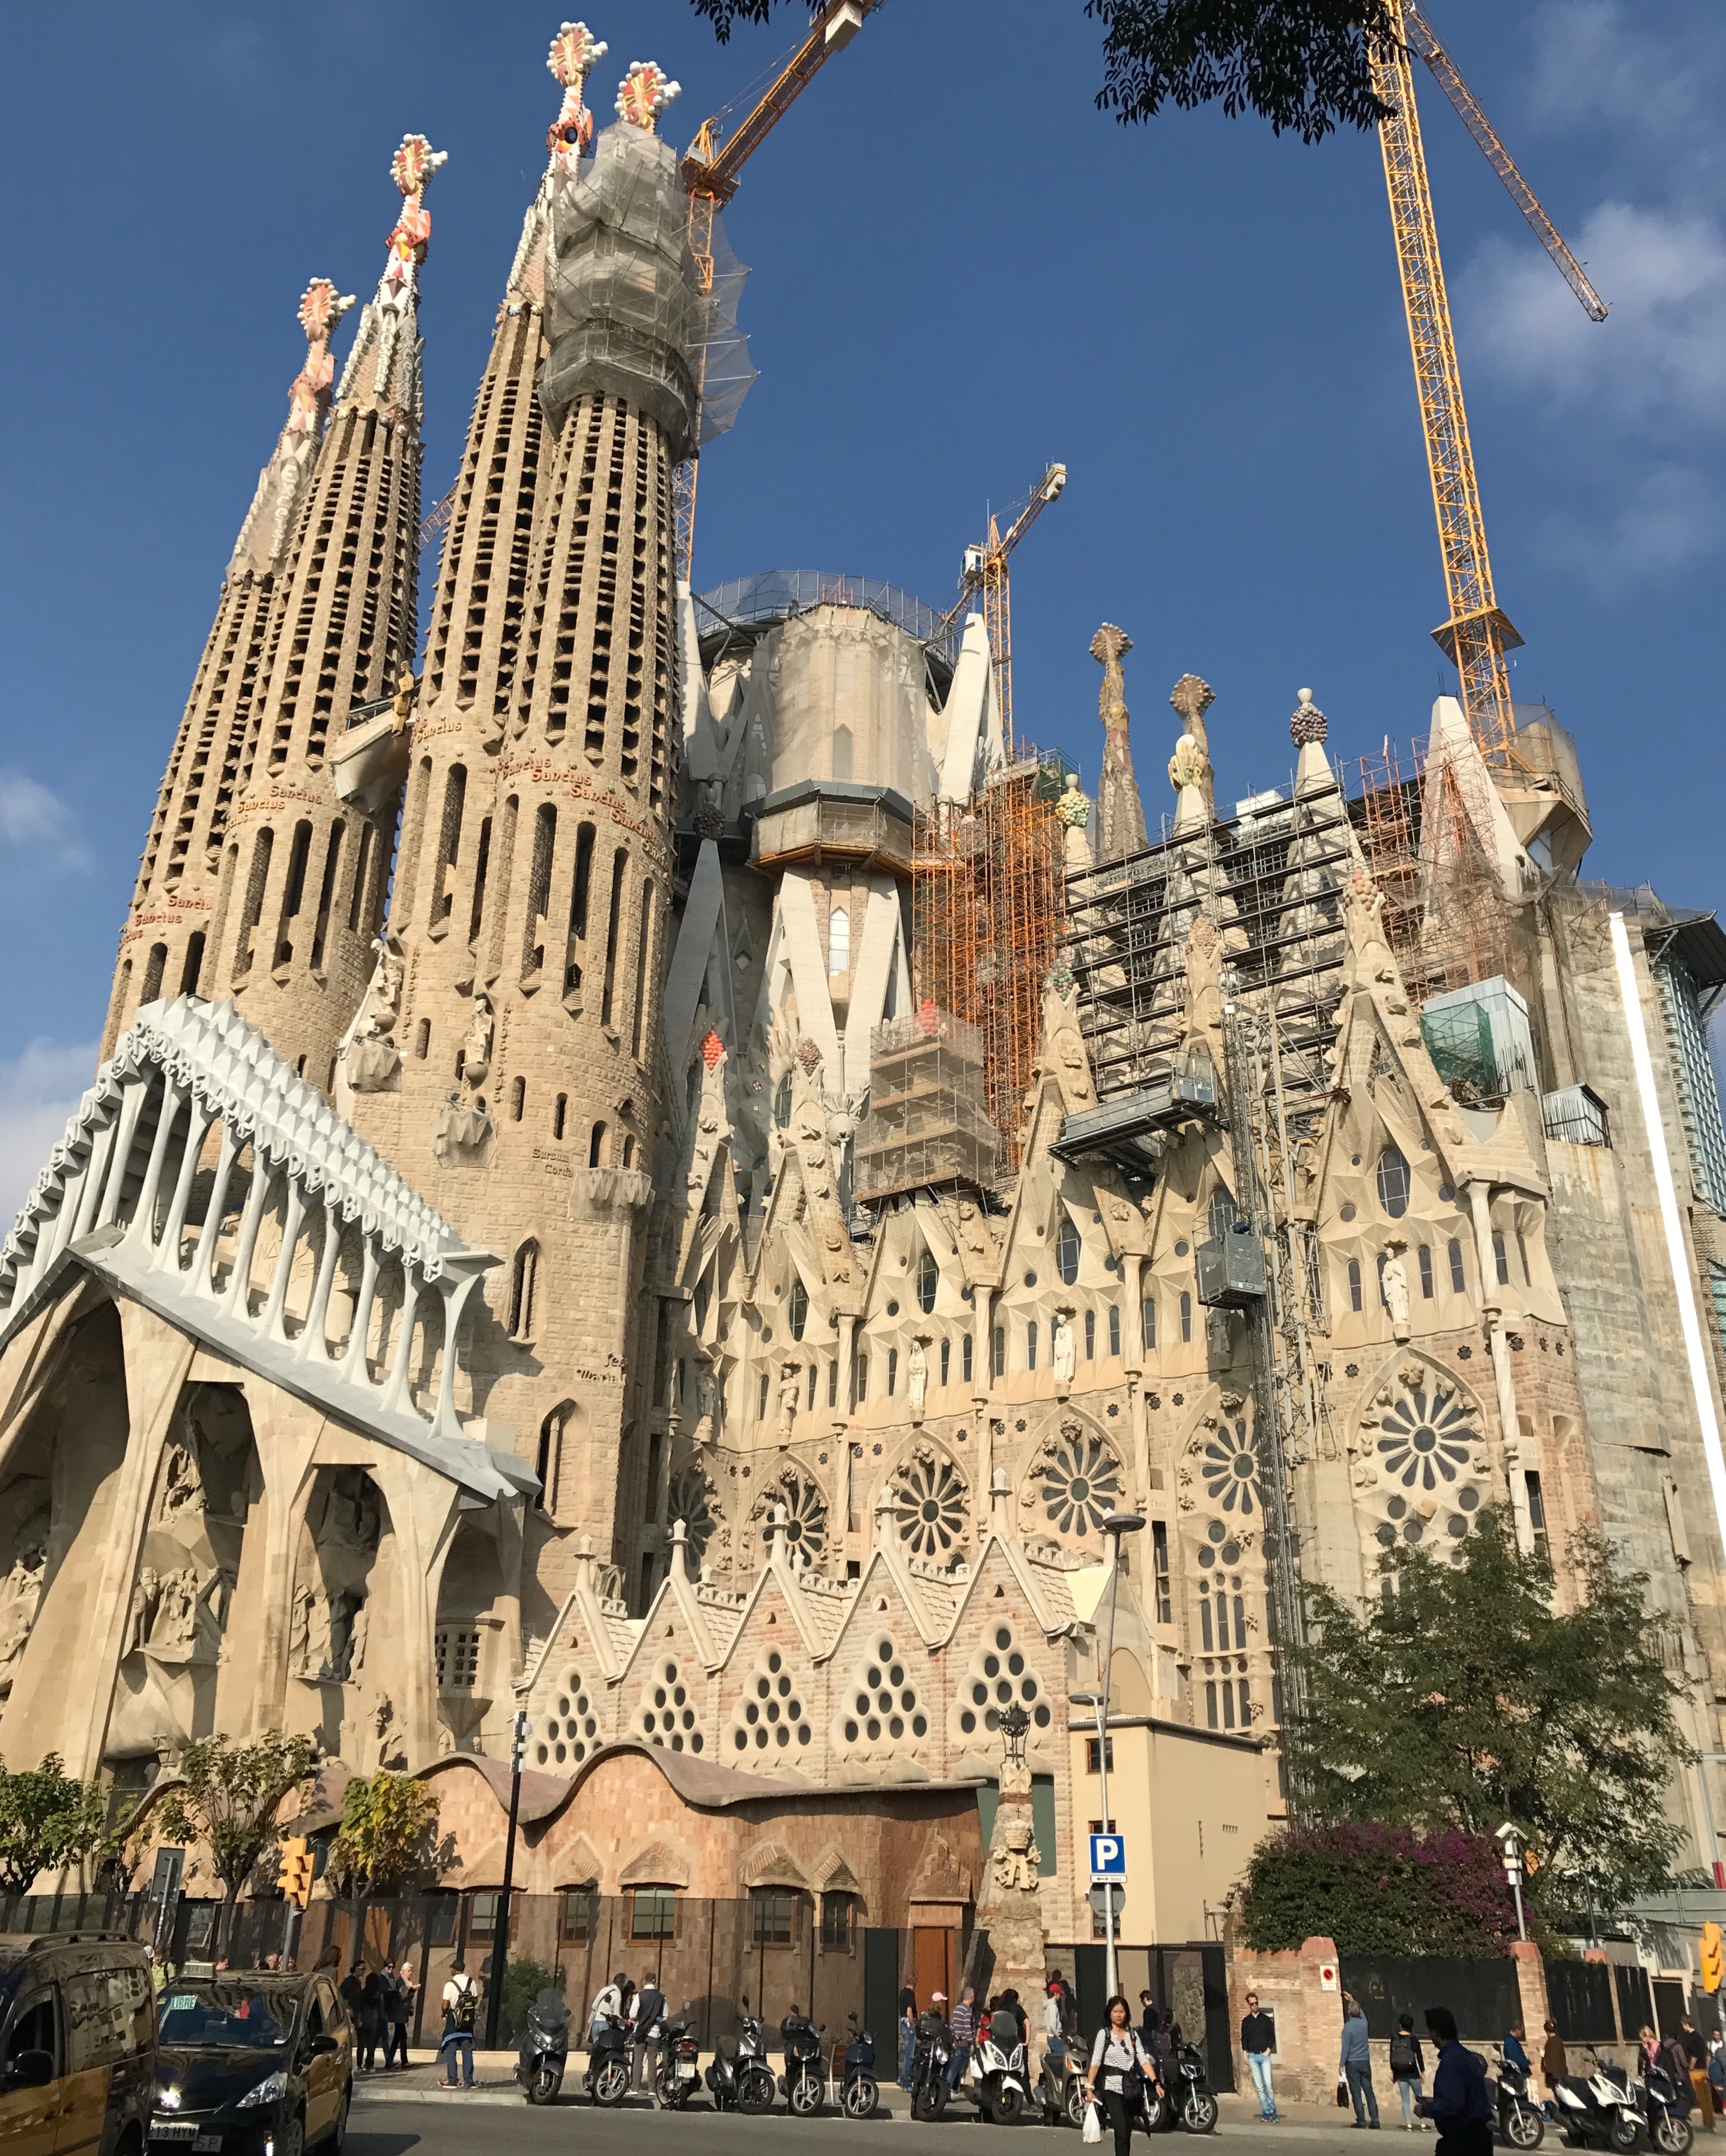 135 years and counting - Gaudí’s iconic Sagrada Família has been under construction since 1882.